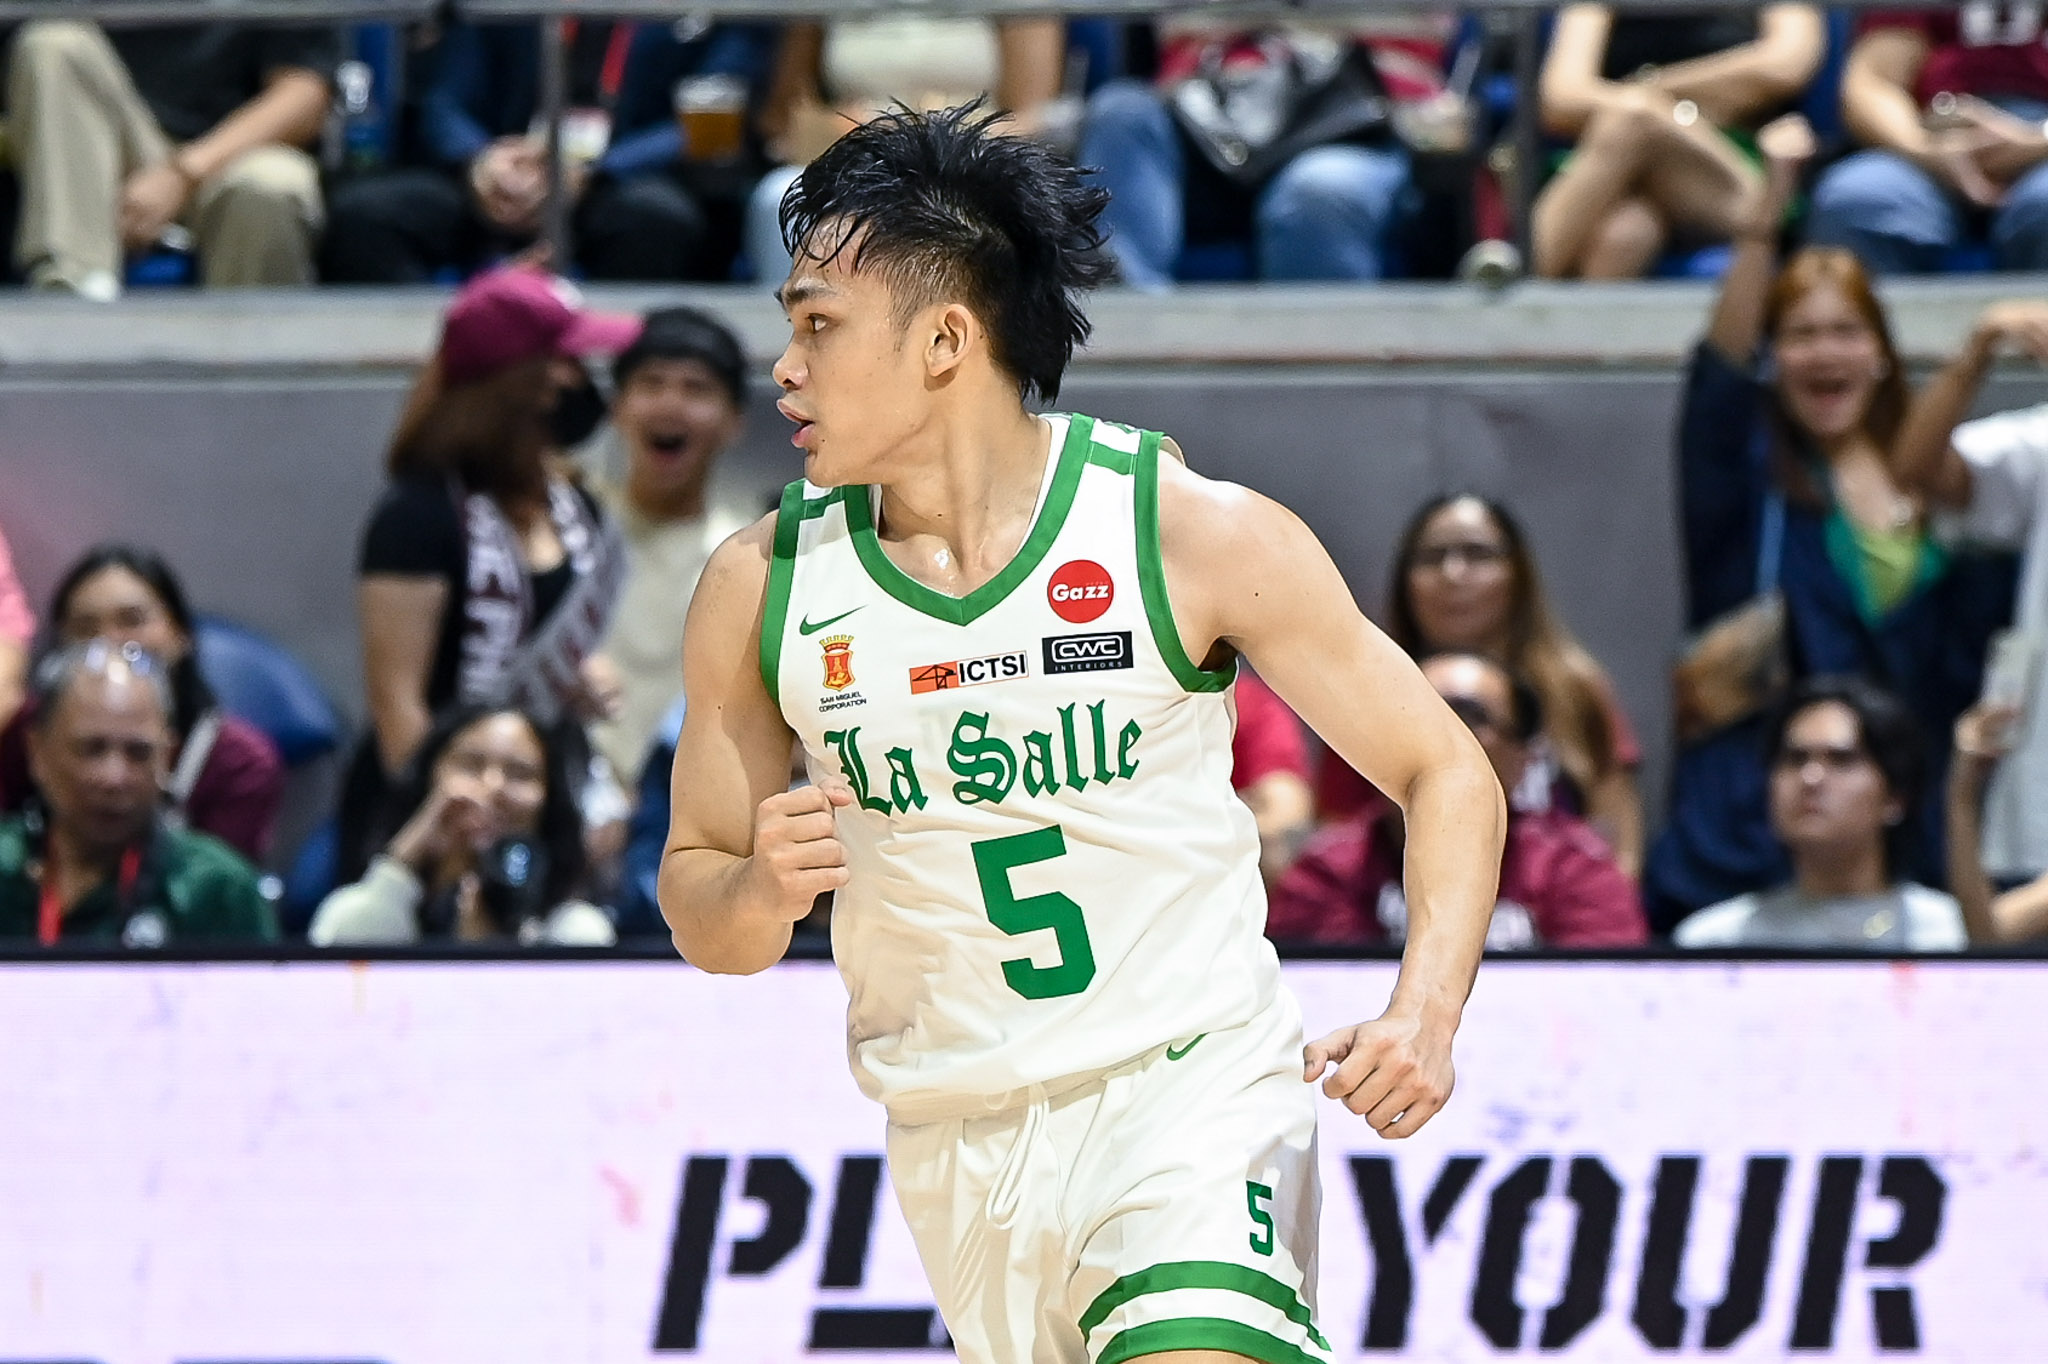 UAAP86-MBB-JOSHUA-DAVID-0508 La Salle practices got heated trying to emulate UP's physicality, bares Joshua David Basketball DLSU News UAAP  - philippine sports news